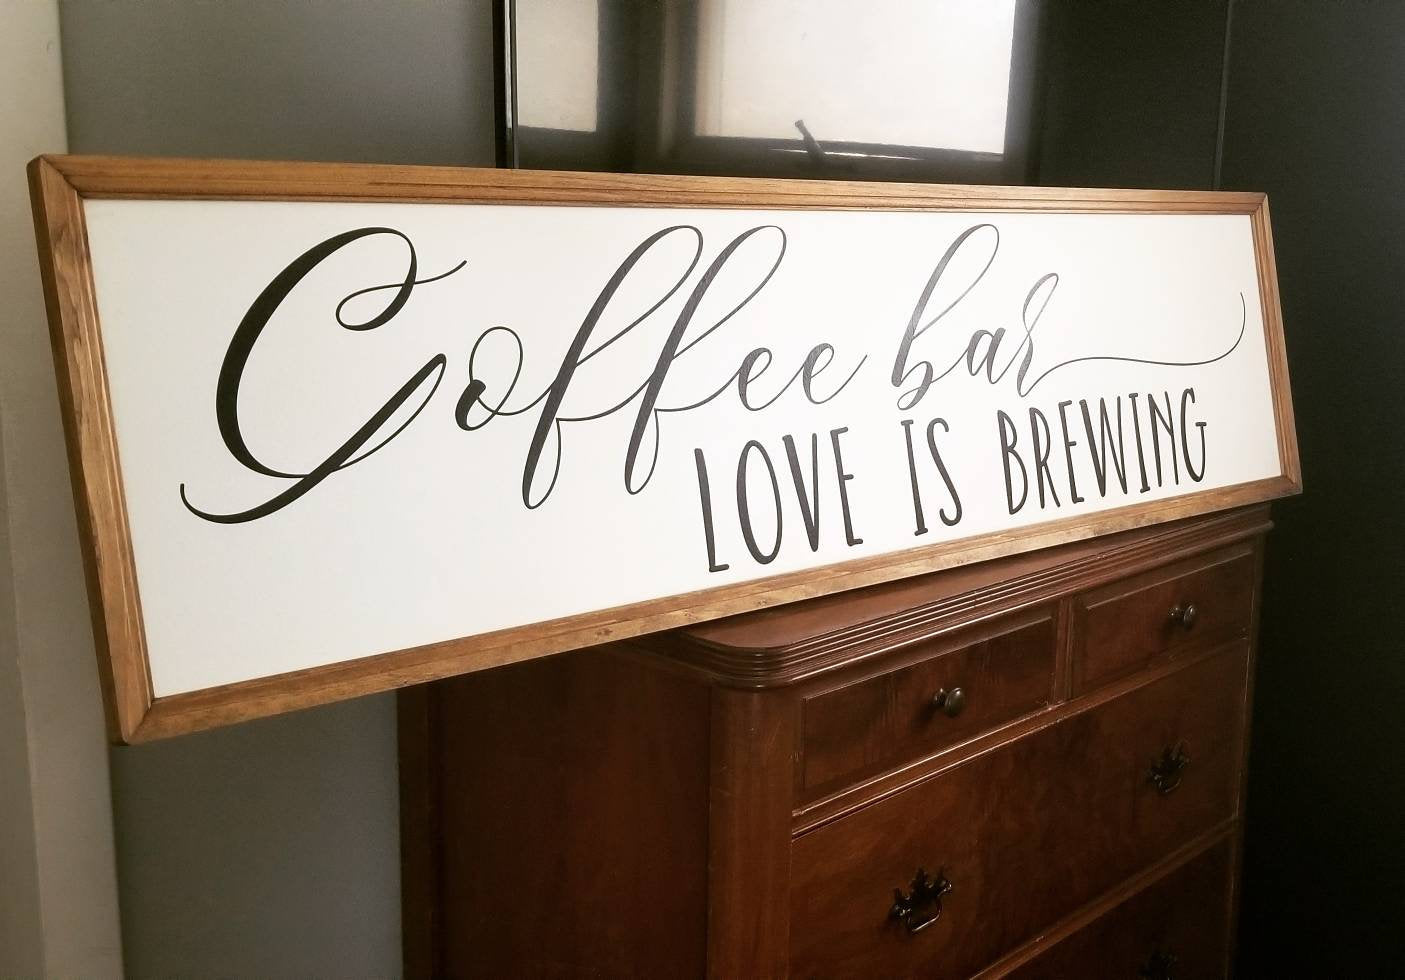 Coffee bar love is brewing sign